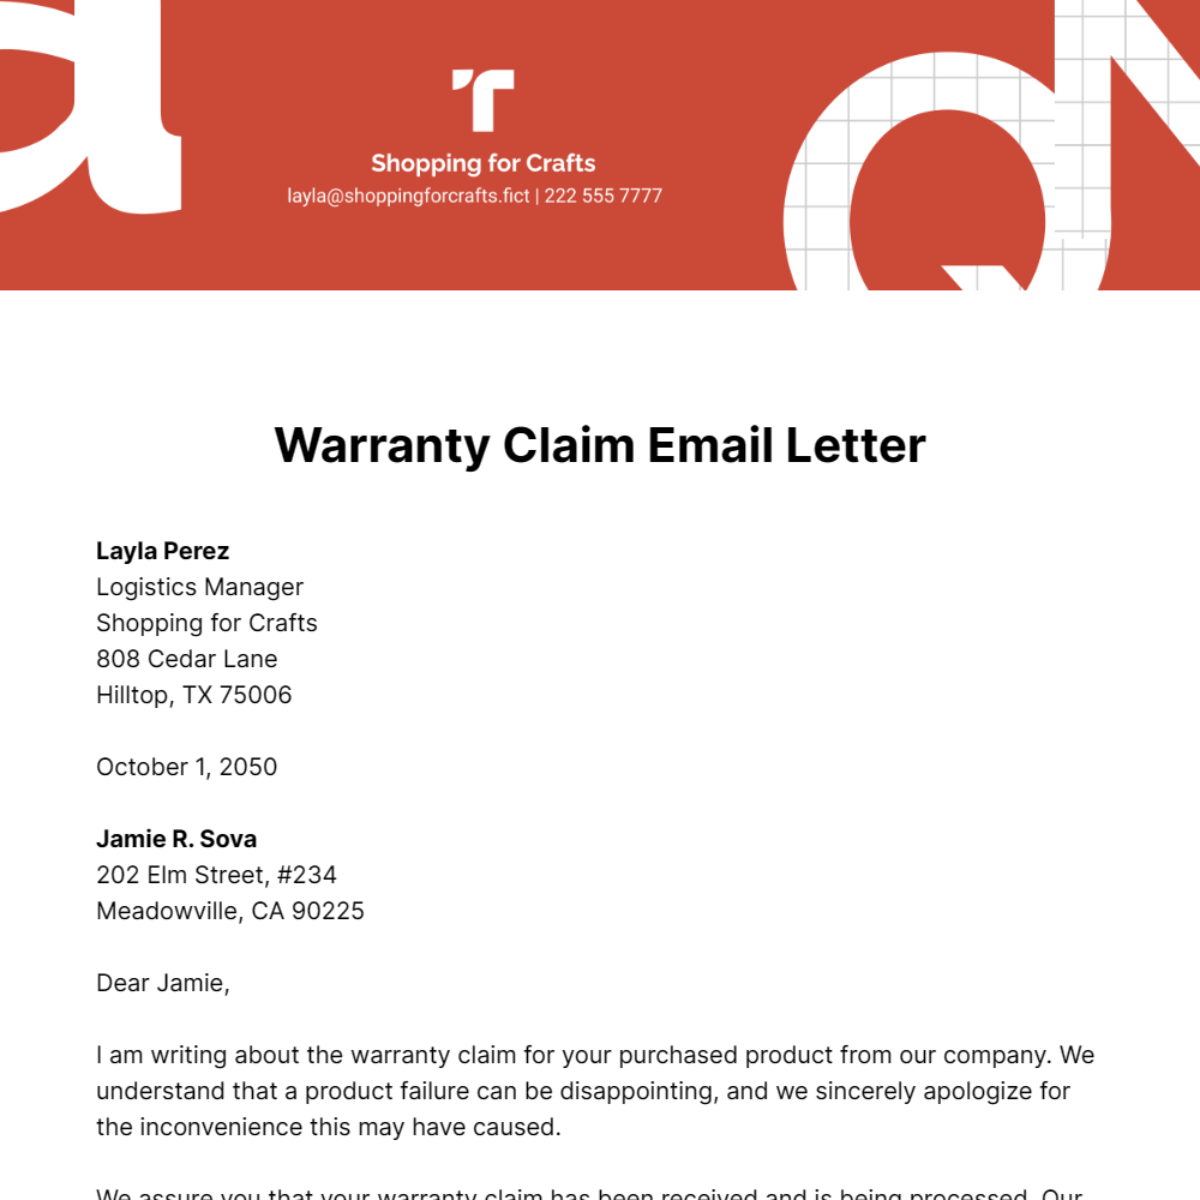 Warranty Claim Email Letter Template